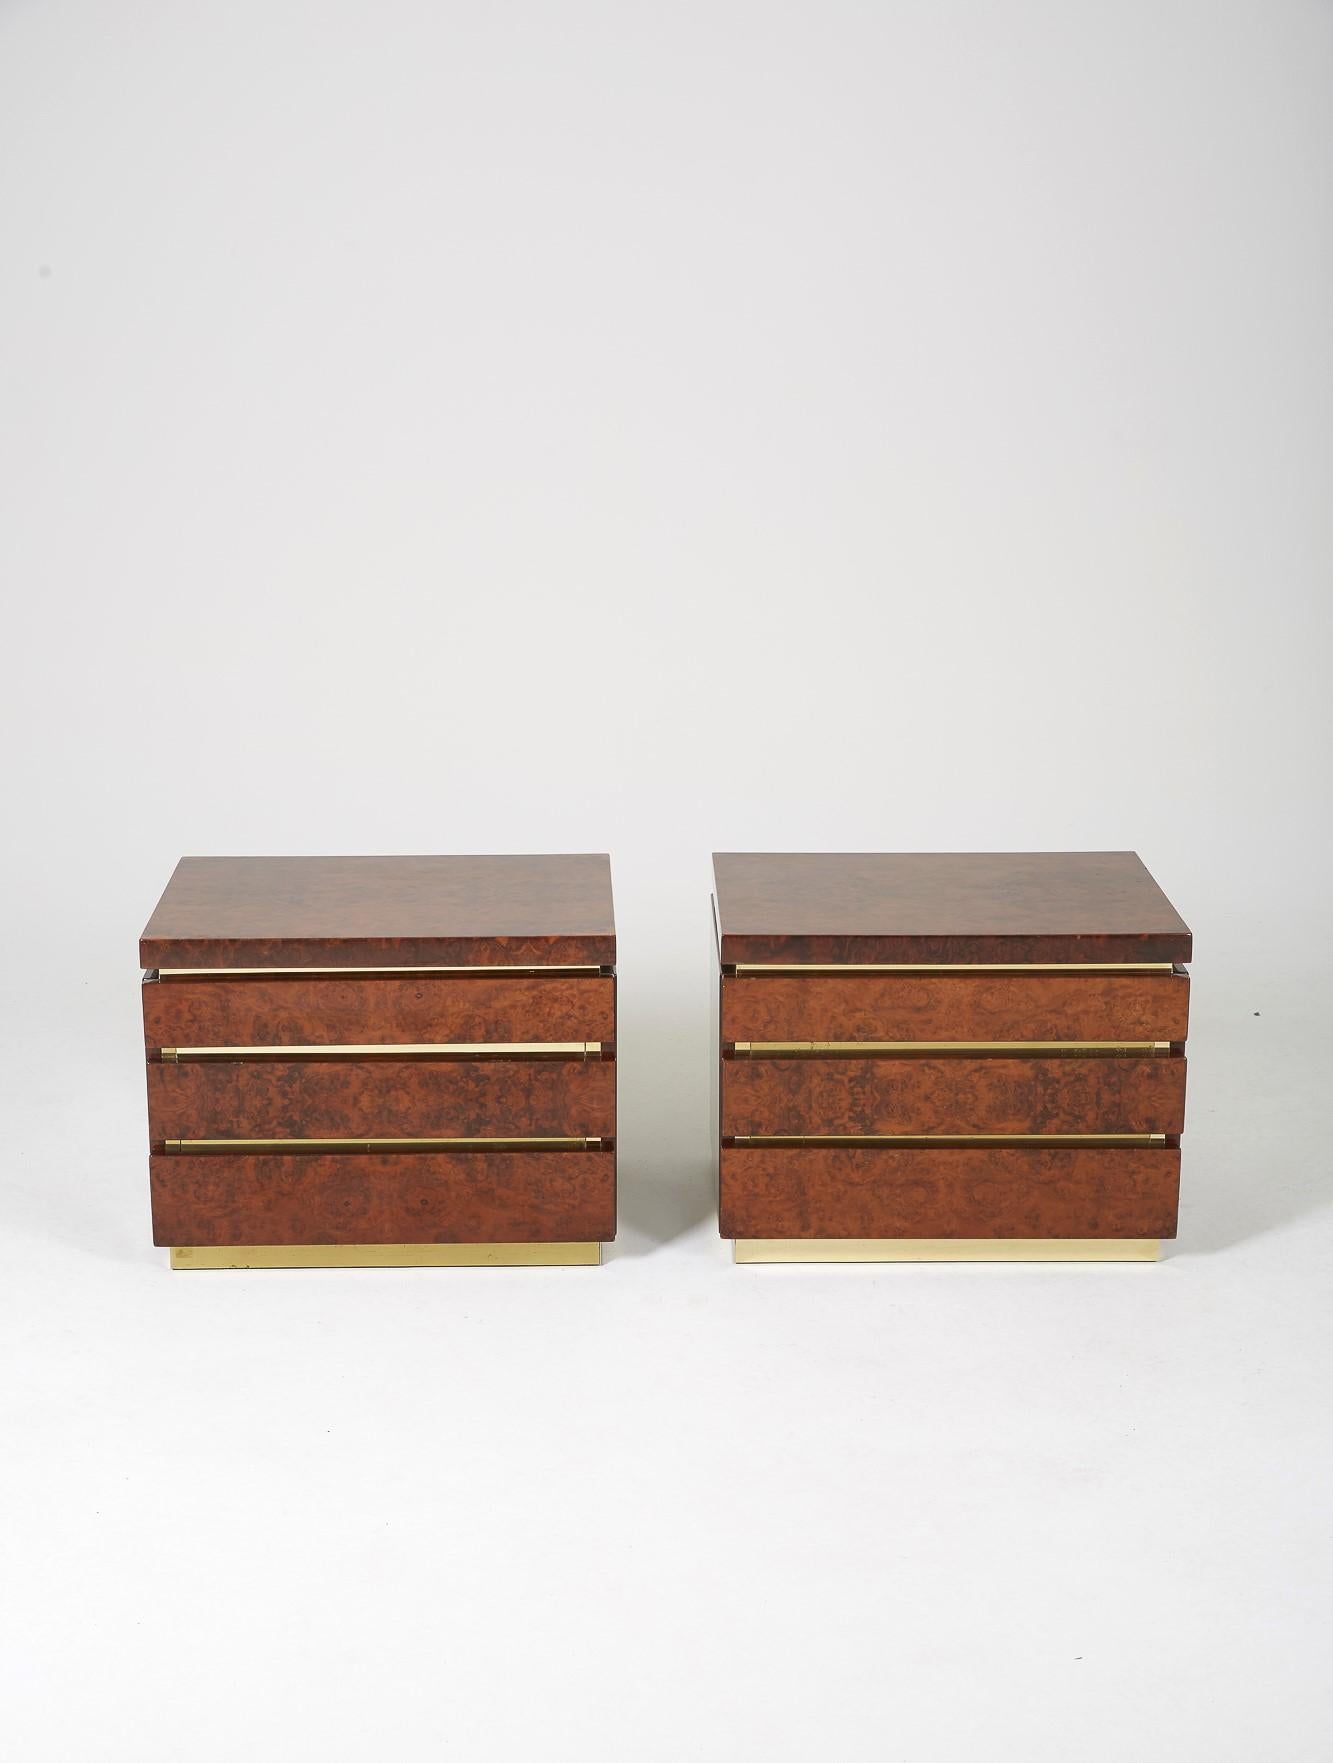 Pair of bedside tables by Jean Claude Mahey in burr elm and brass from the 70s. Each composed of 3 drawers. Very nice aspect of the wood highlighted by the brass angles. Good condition with some traces of use. French work label present on the back